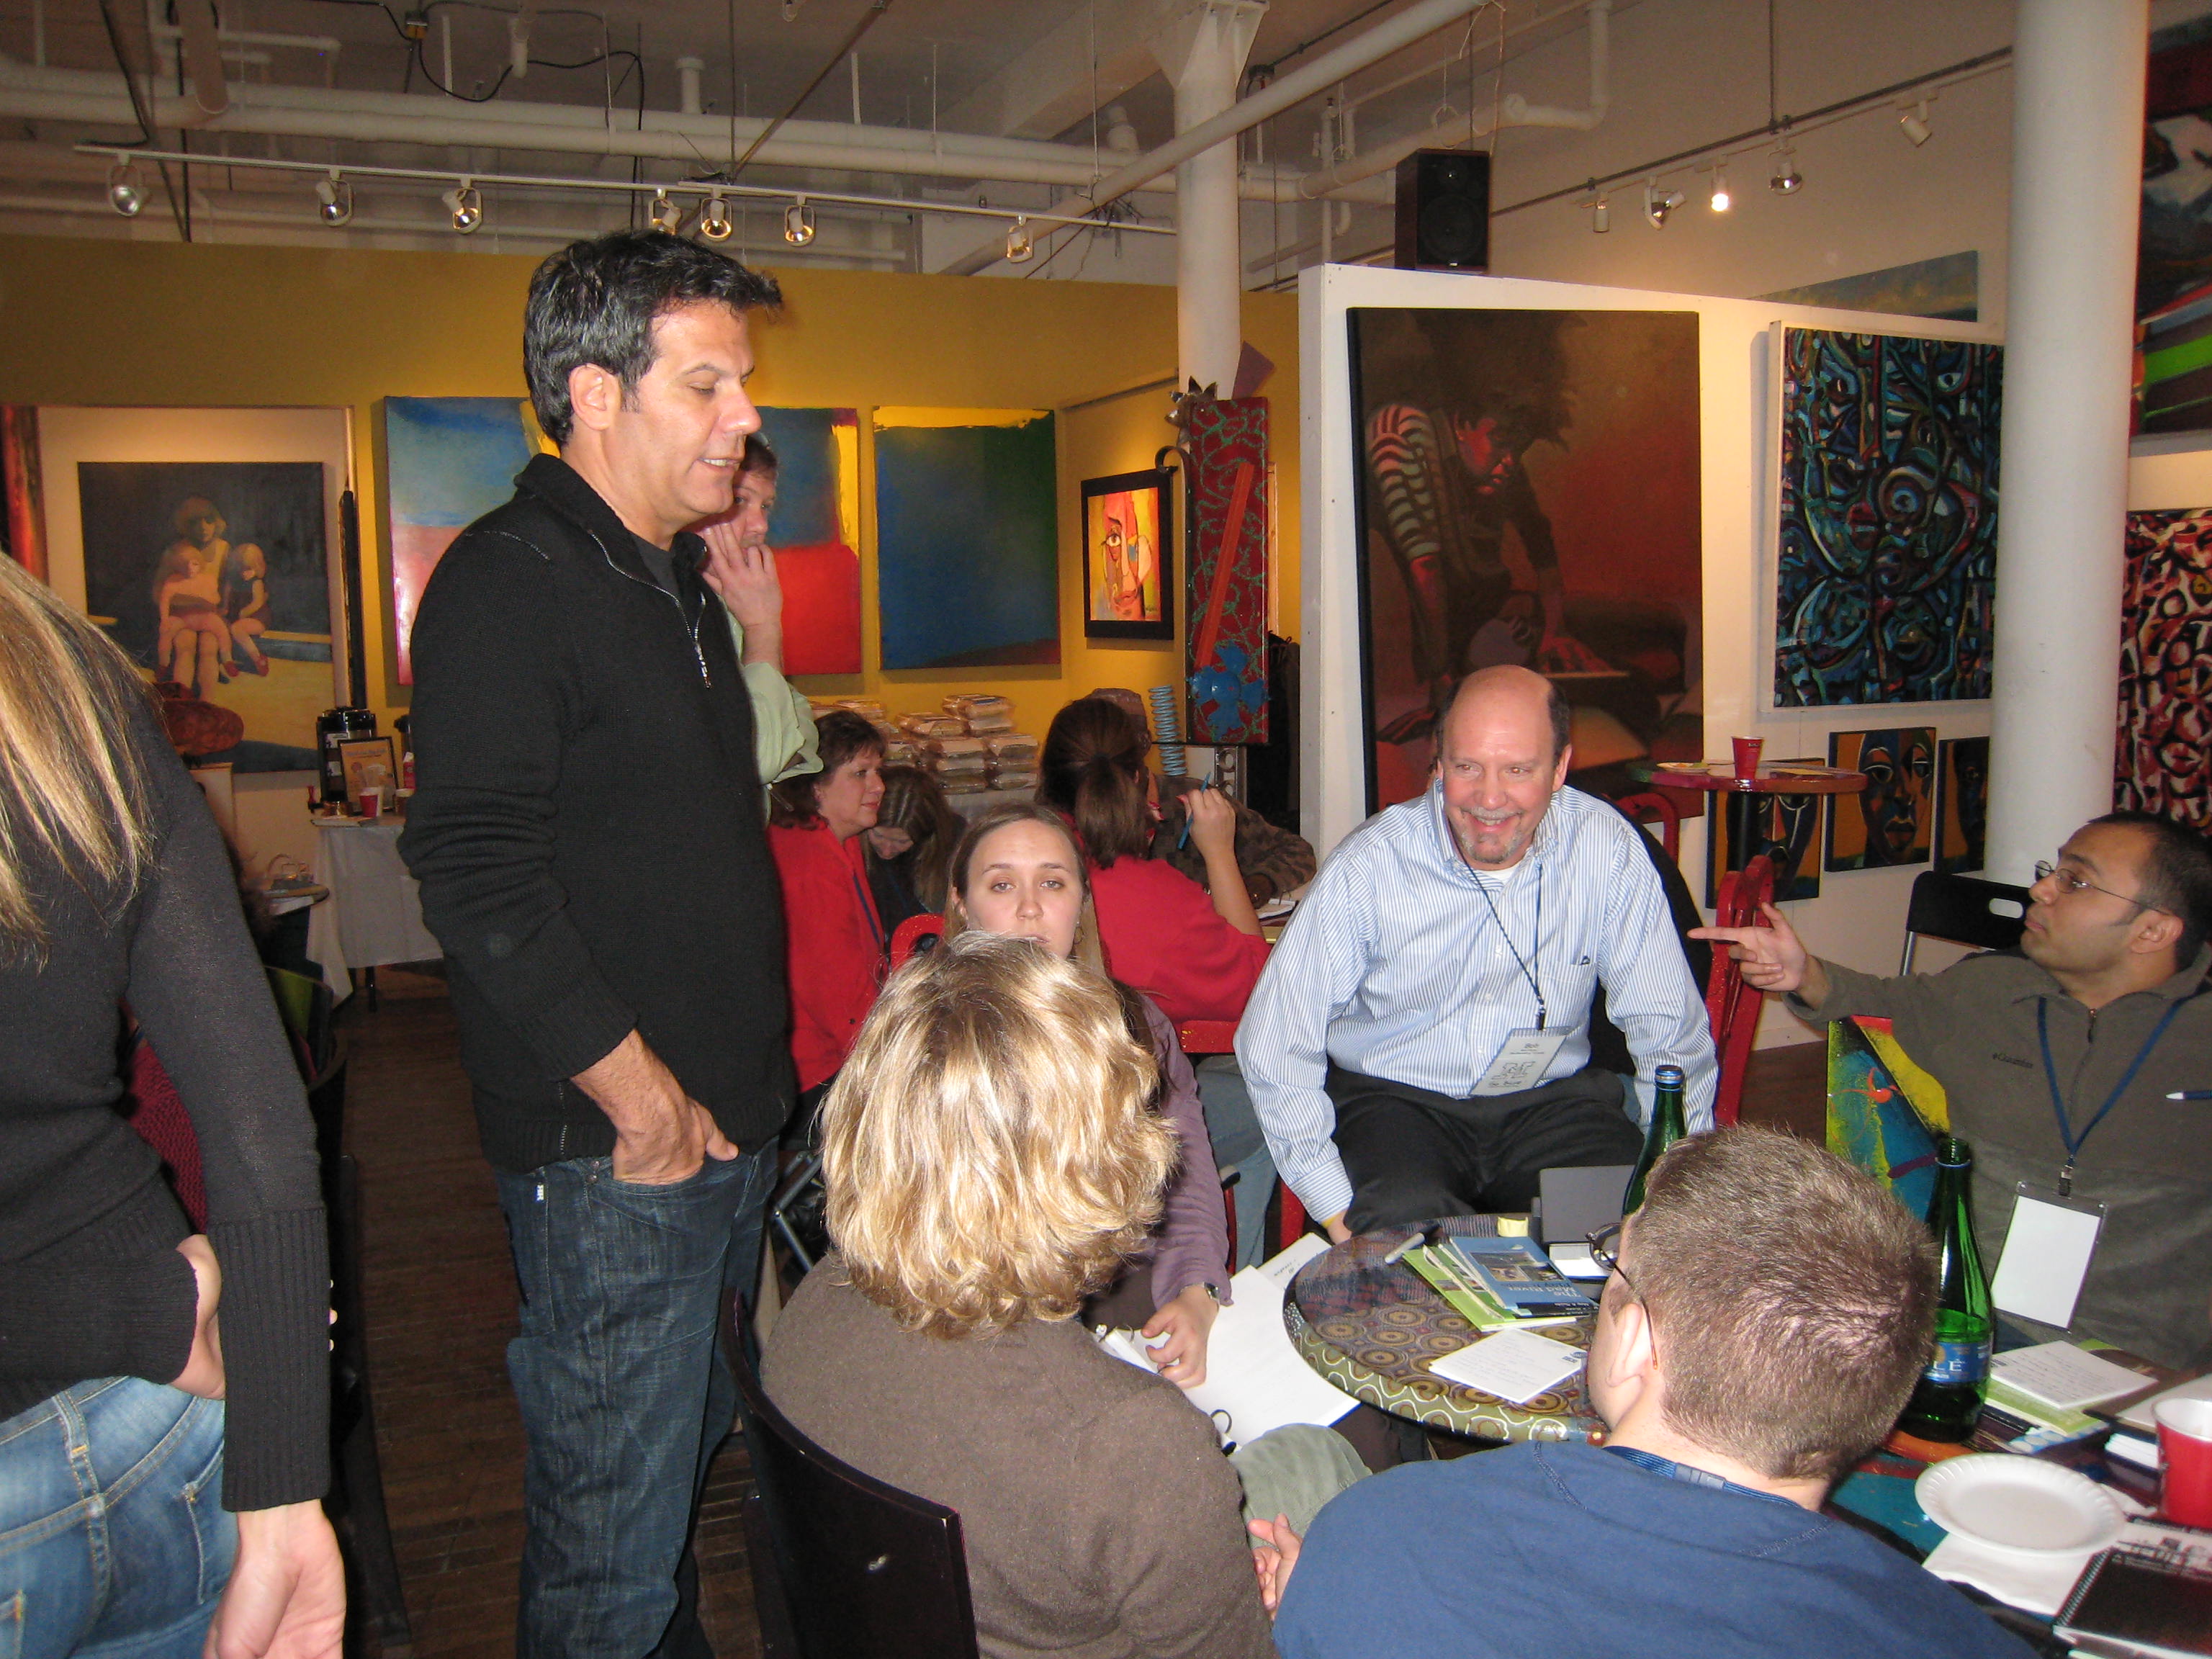 Best-selling author and urban planner Richard Florida visits an art and design studio in Dayton, OH.